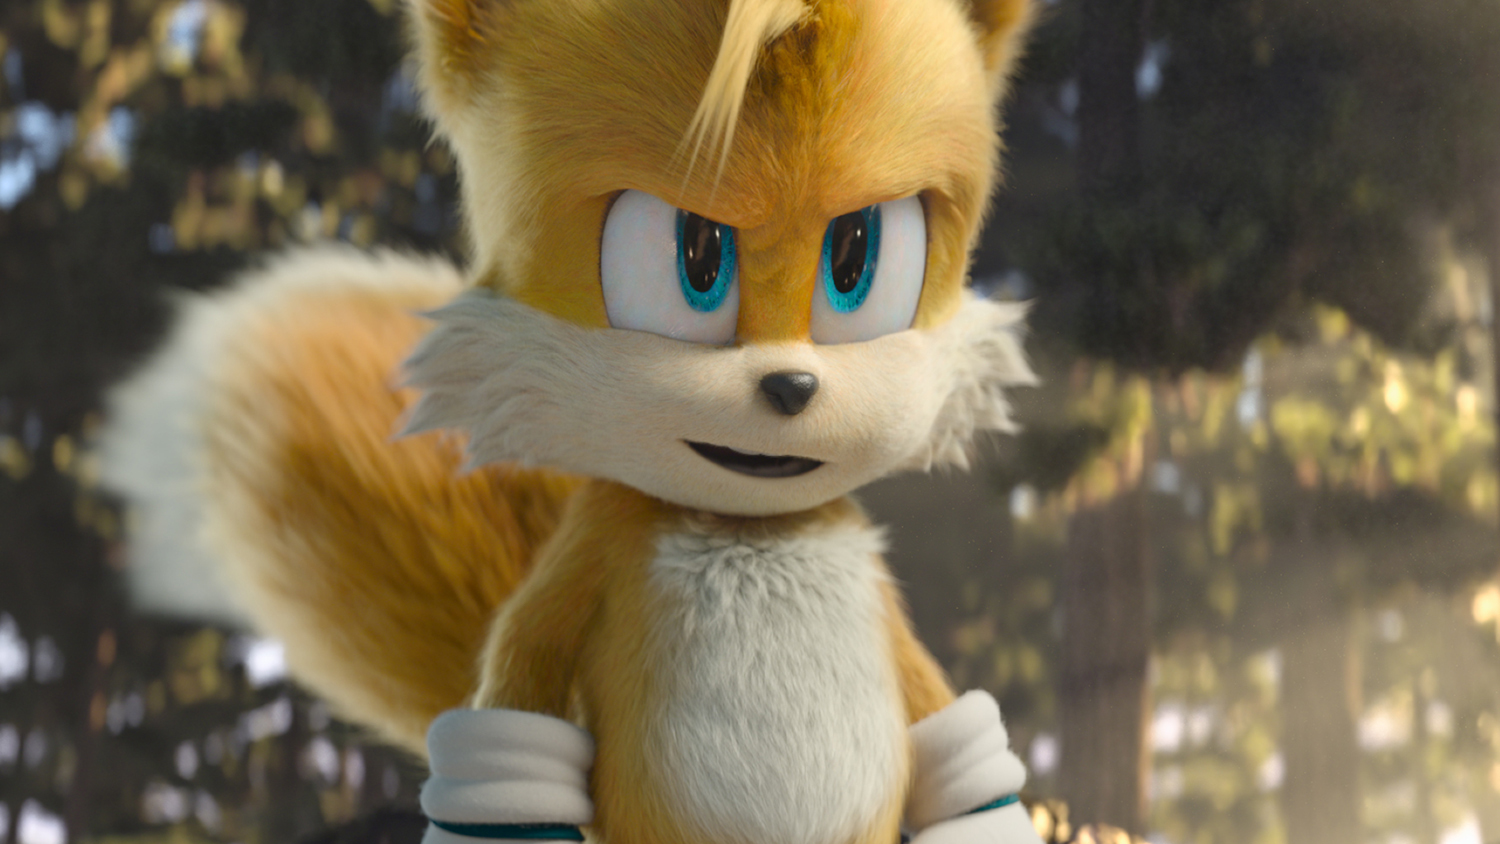 Tails in the Sonic the Hedgehog movie